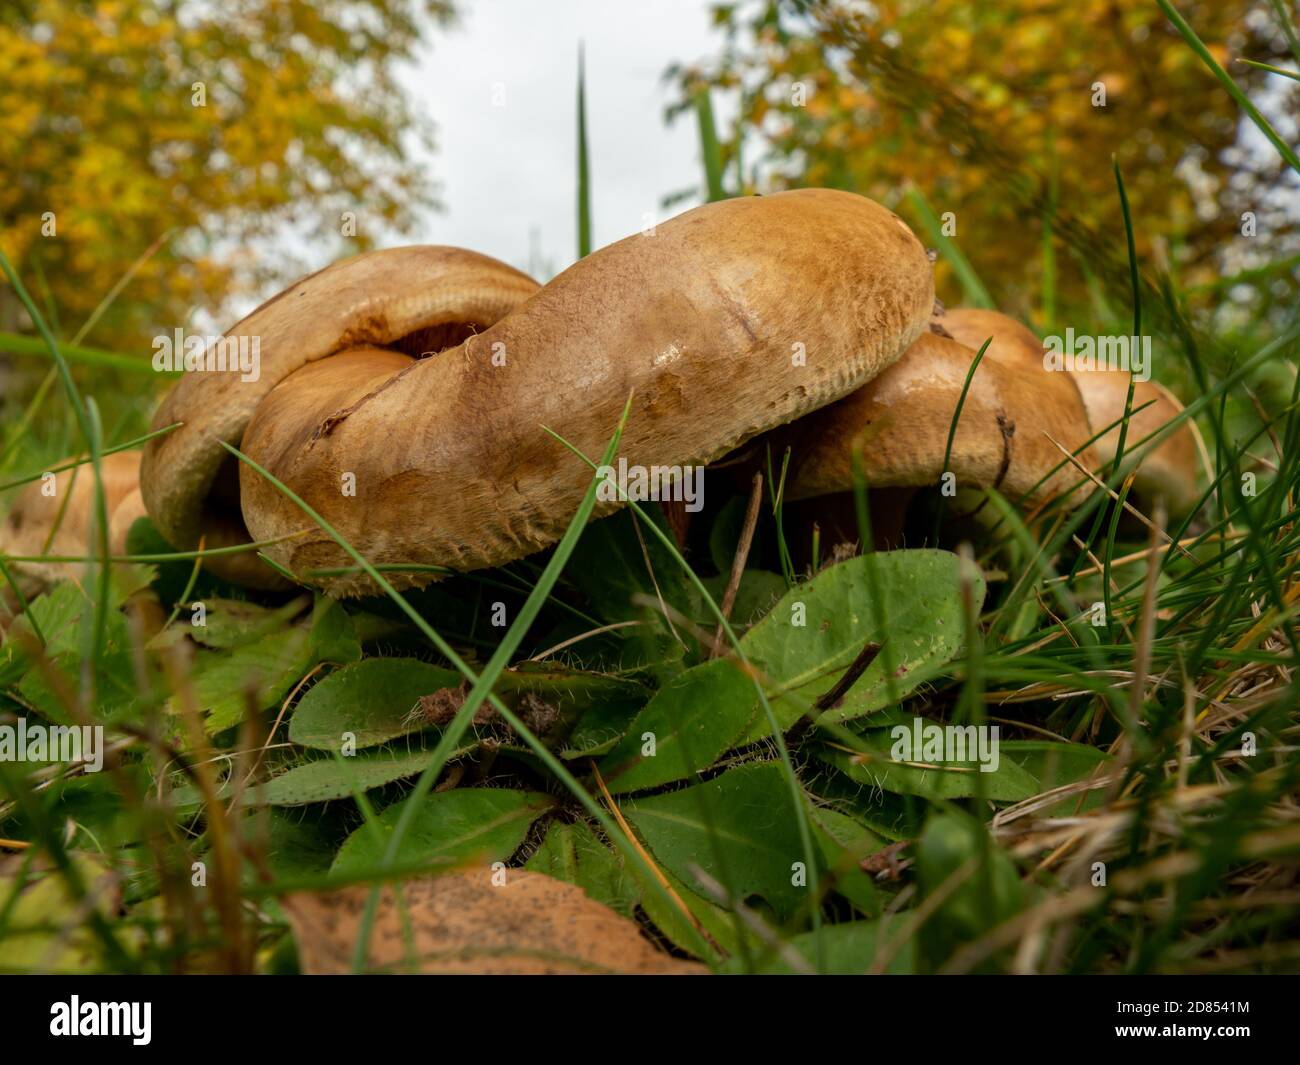 Uneatable brown mushrooms in the natural environment. Fall time. Selective focus Stock Photo